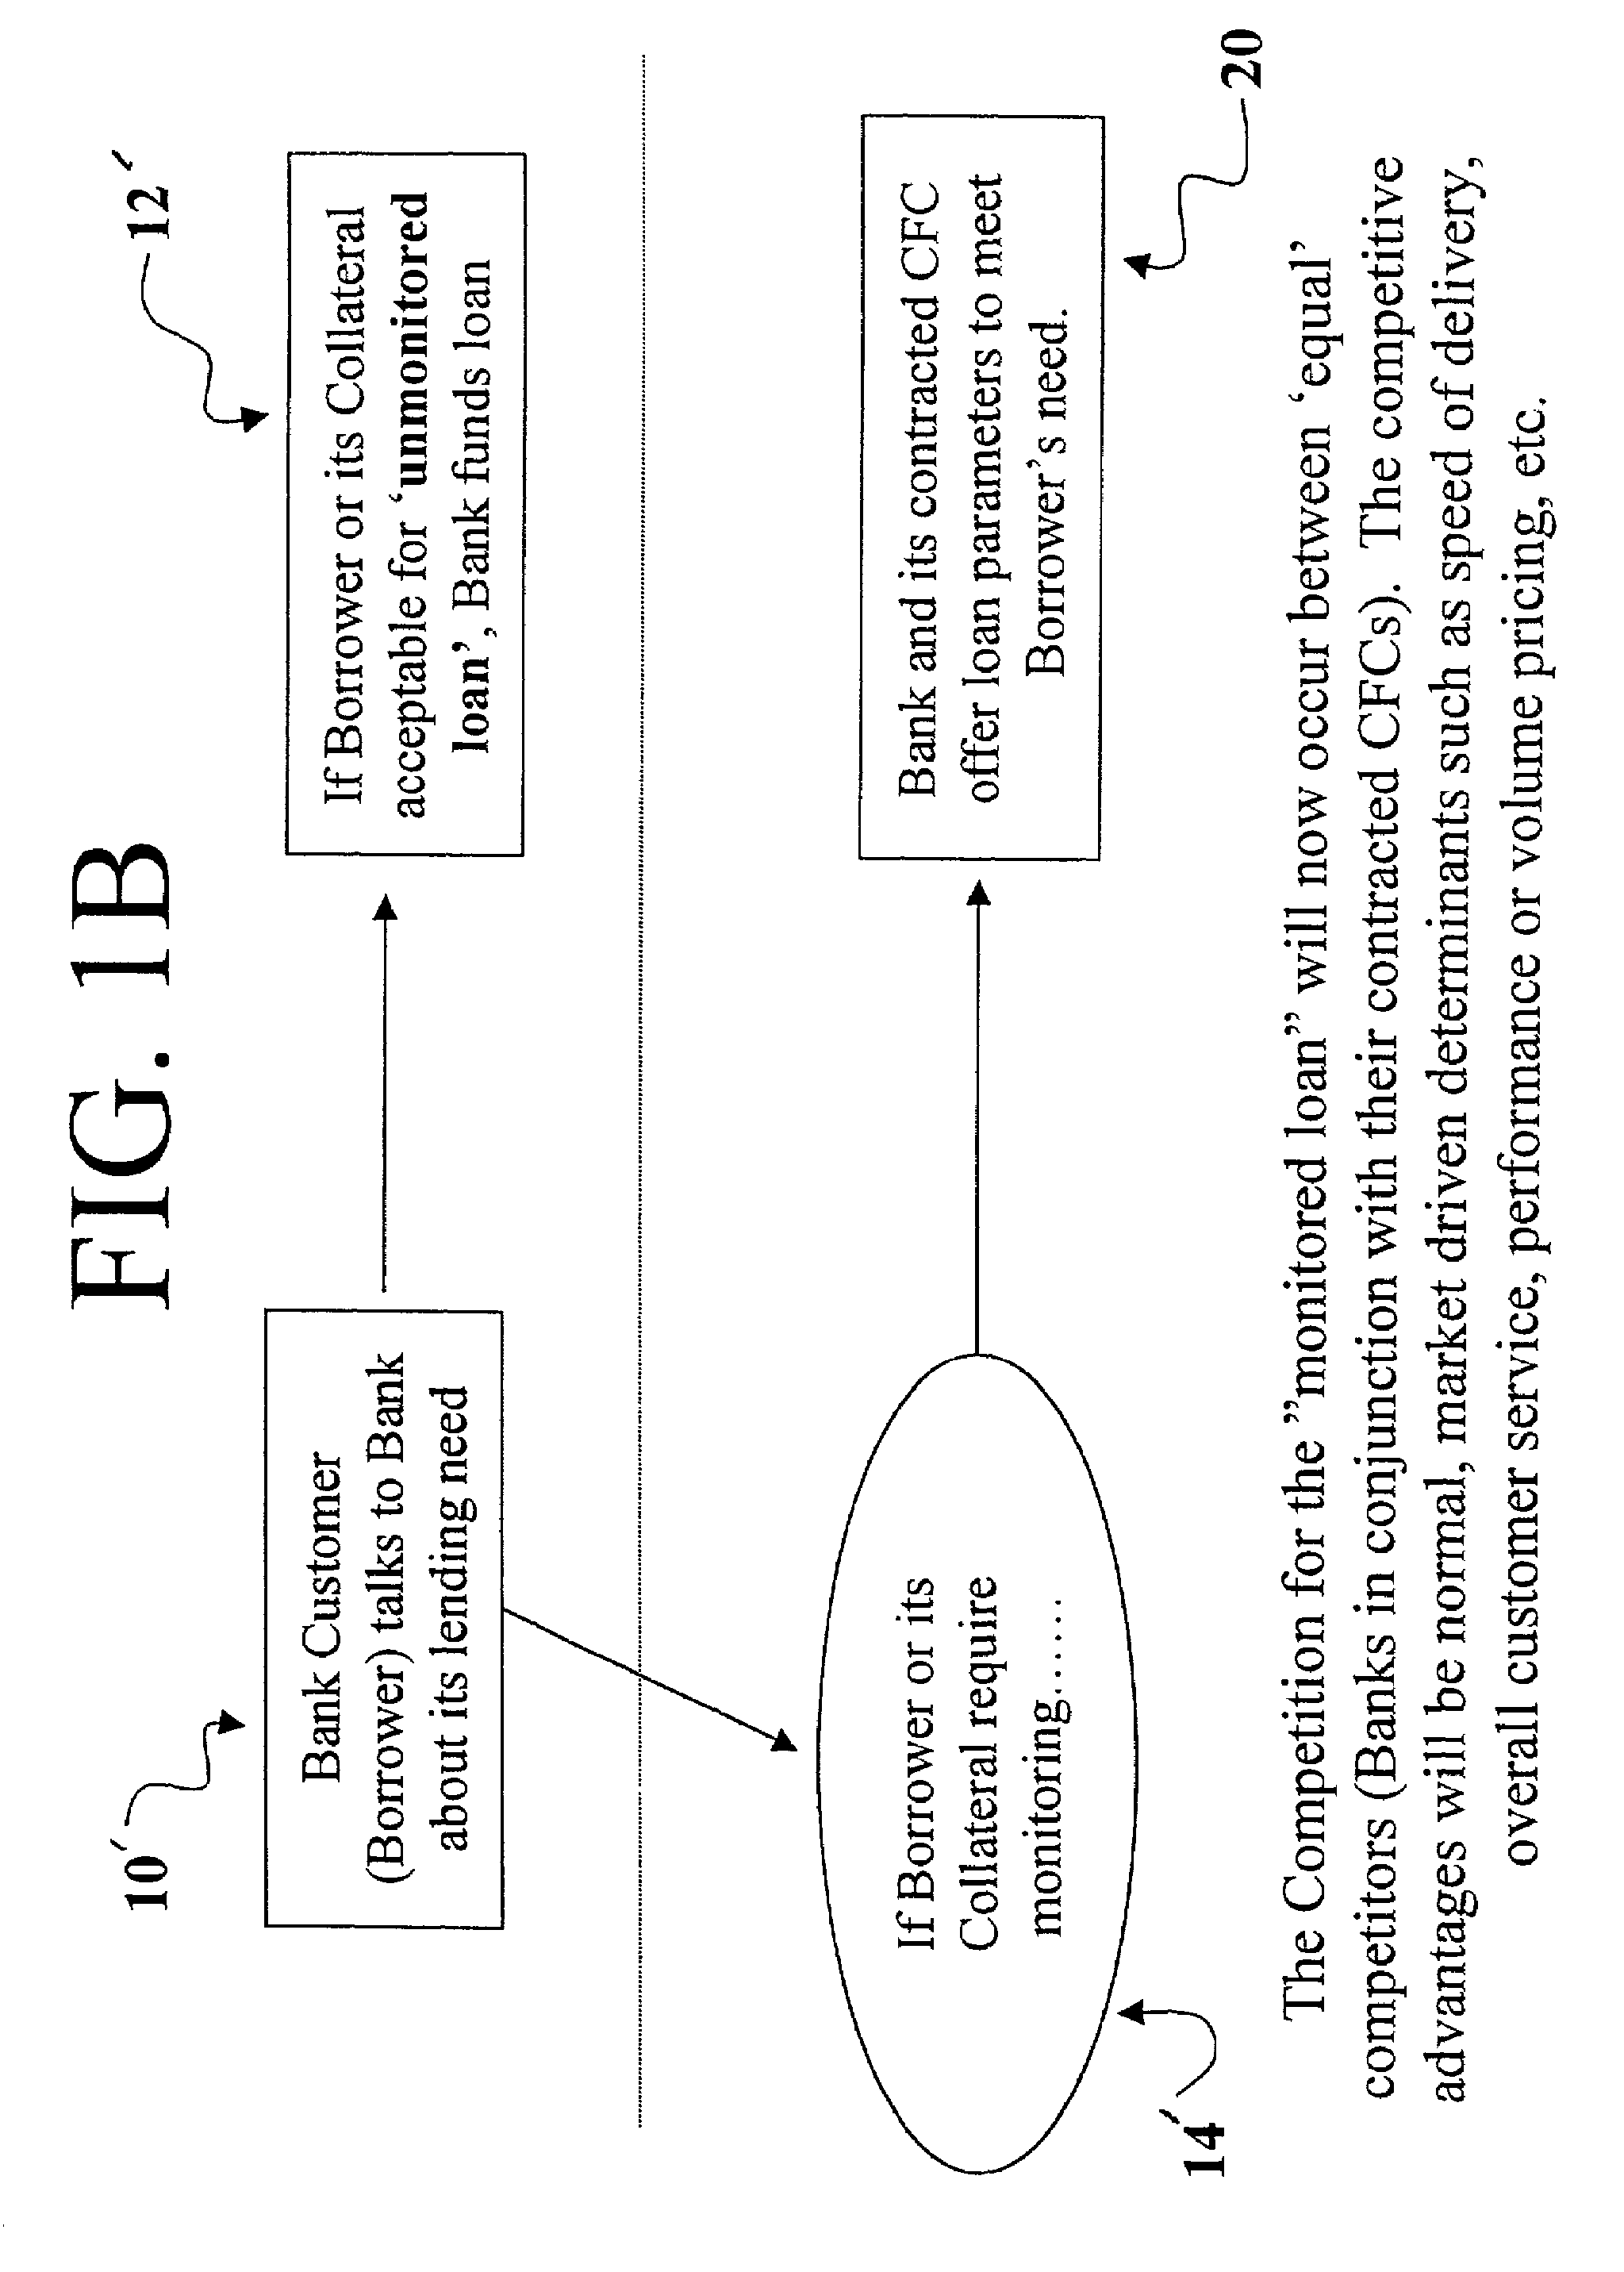 Loan product and system and method for providing and monitoring a loan product